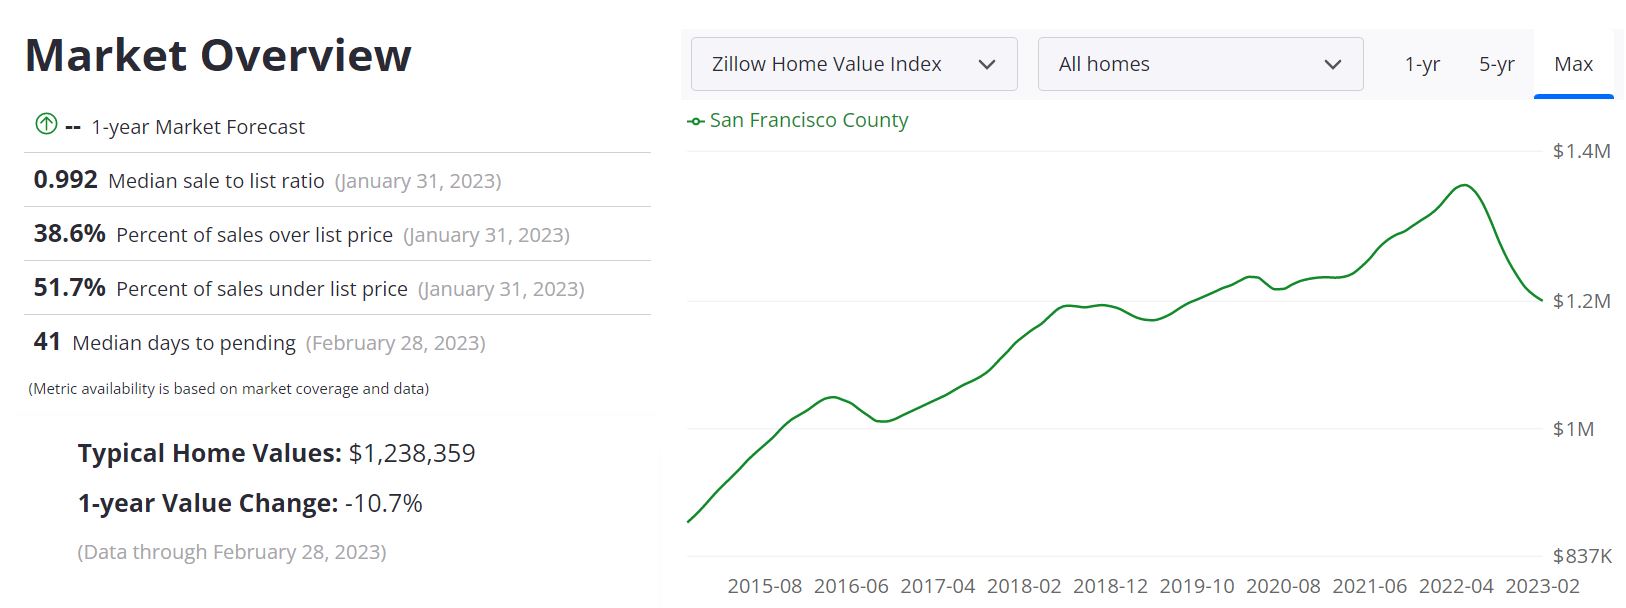 C:\Users\tamse\OneDrive\Documents\Norada\Content Writing\Mar 2023\San Francisco Housing Market Forecast.jpg